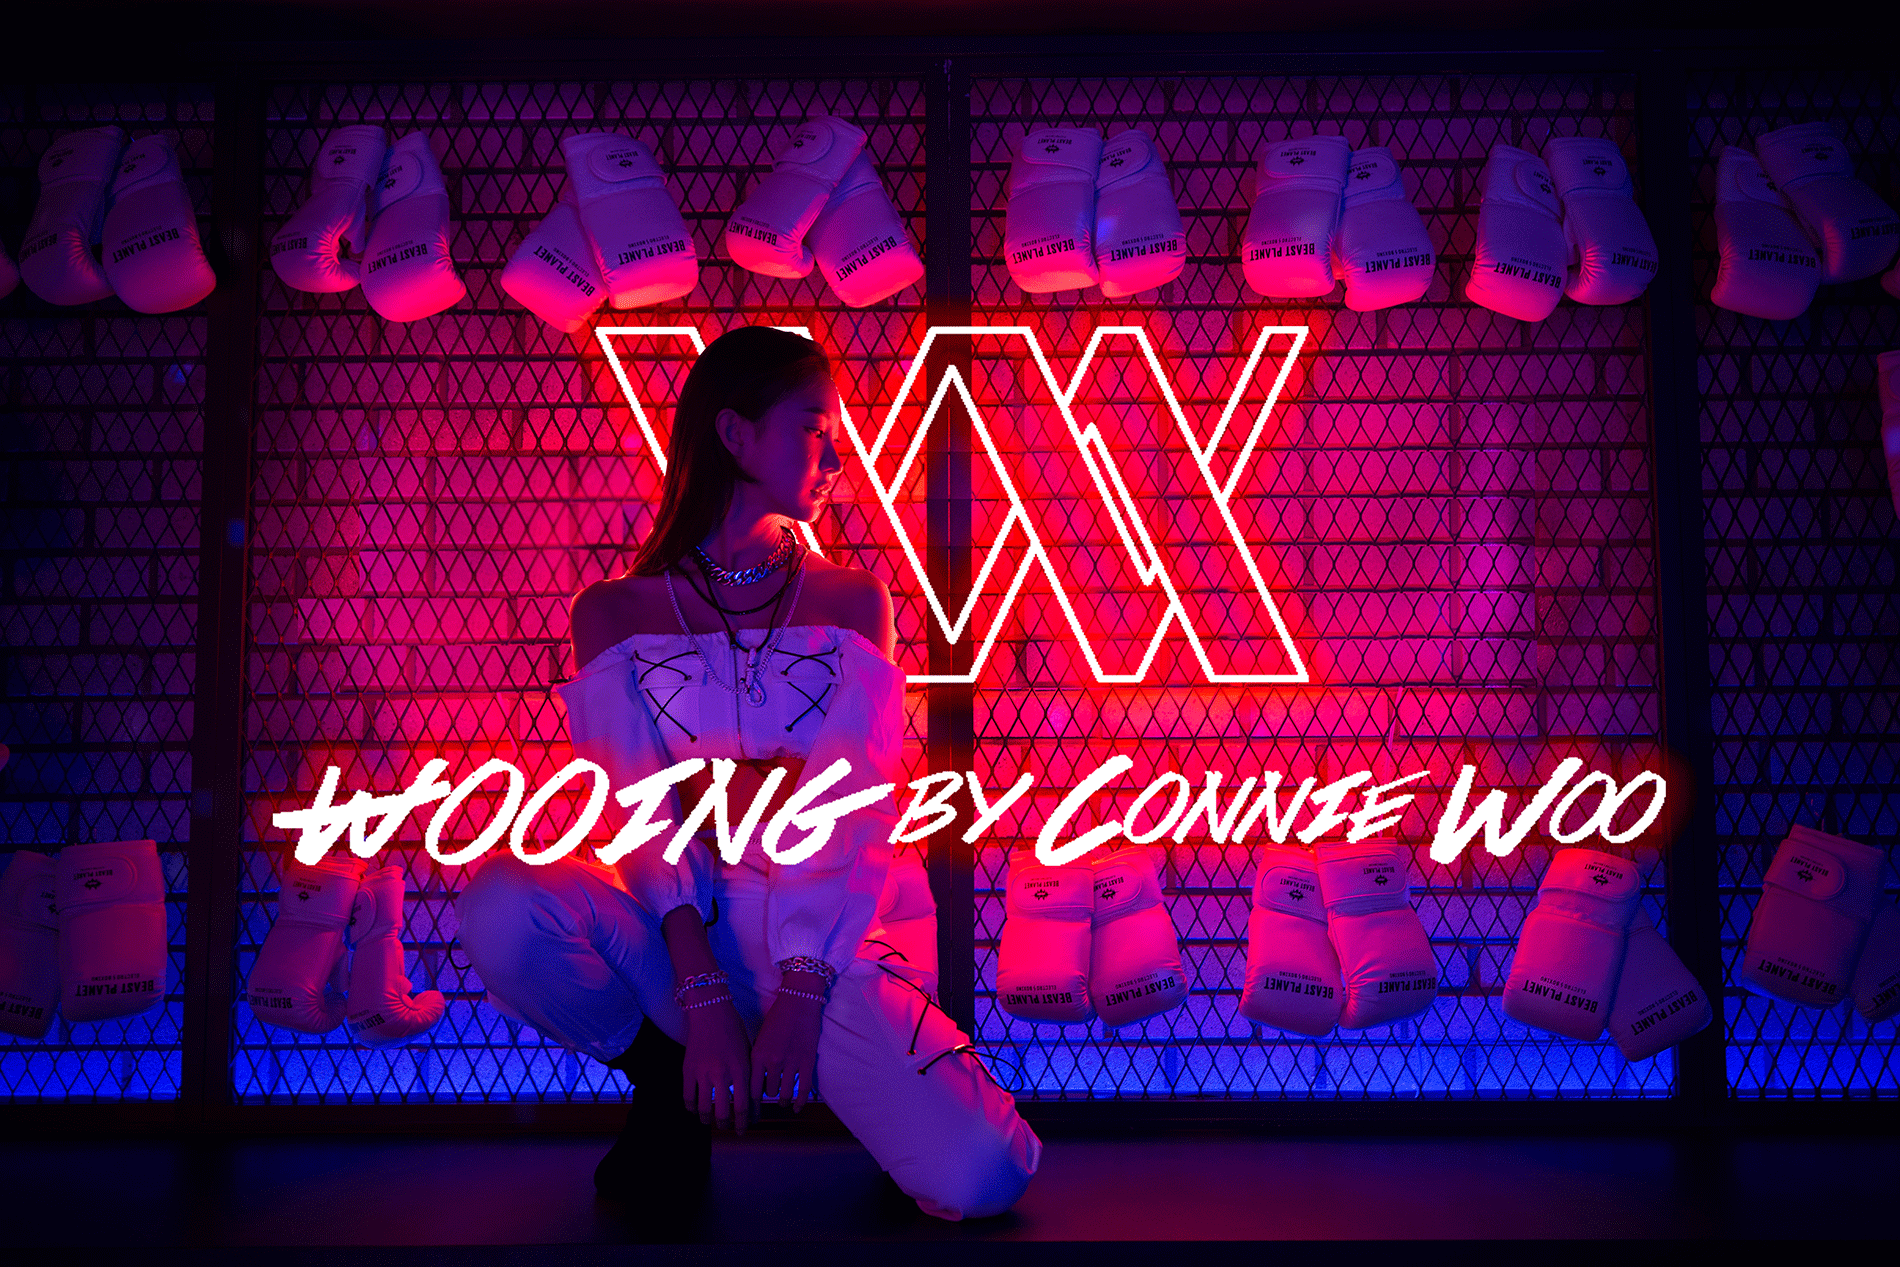 wooing by connie woo